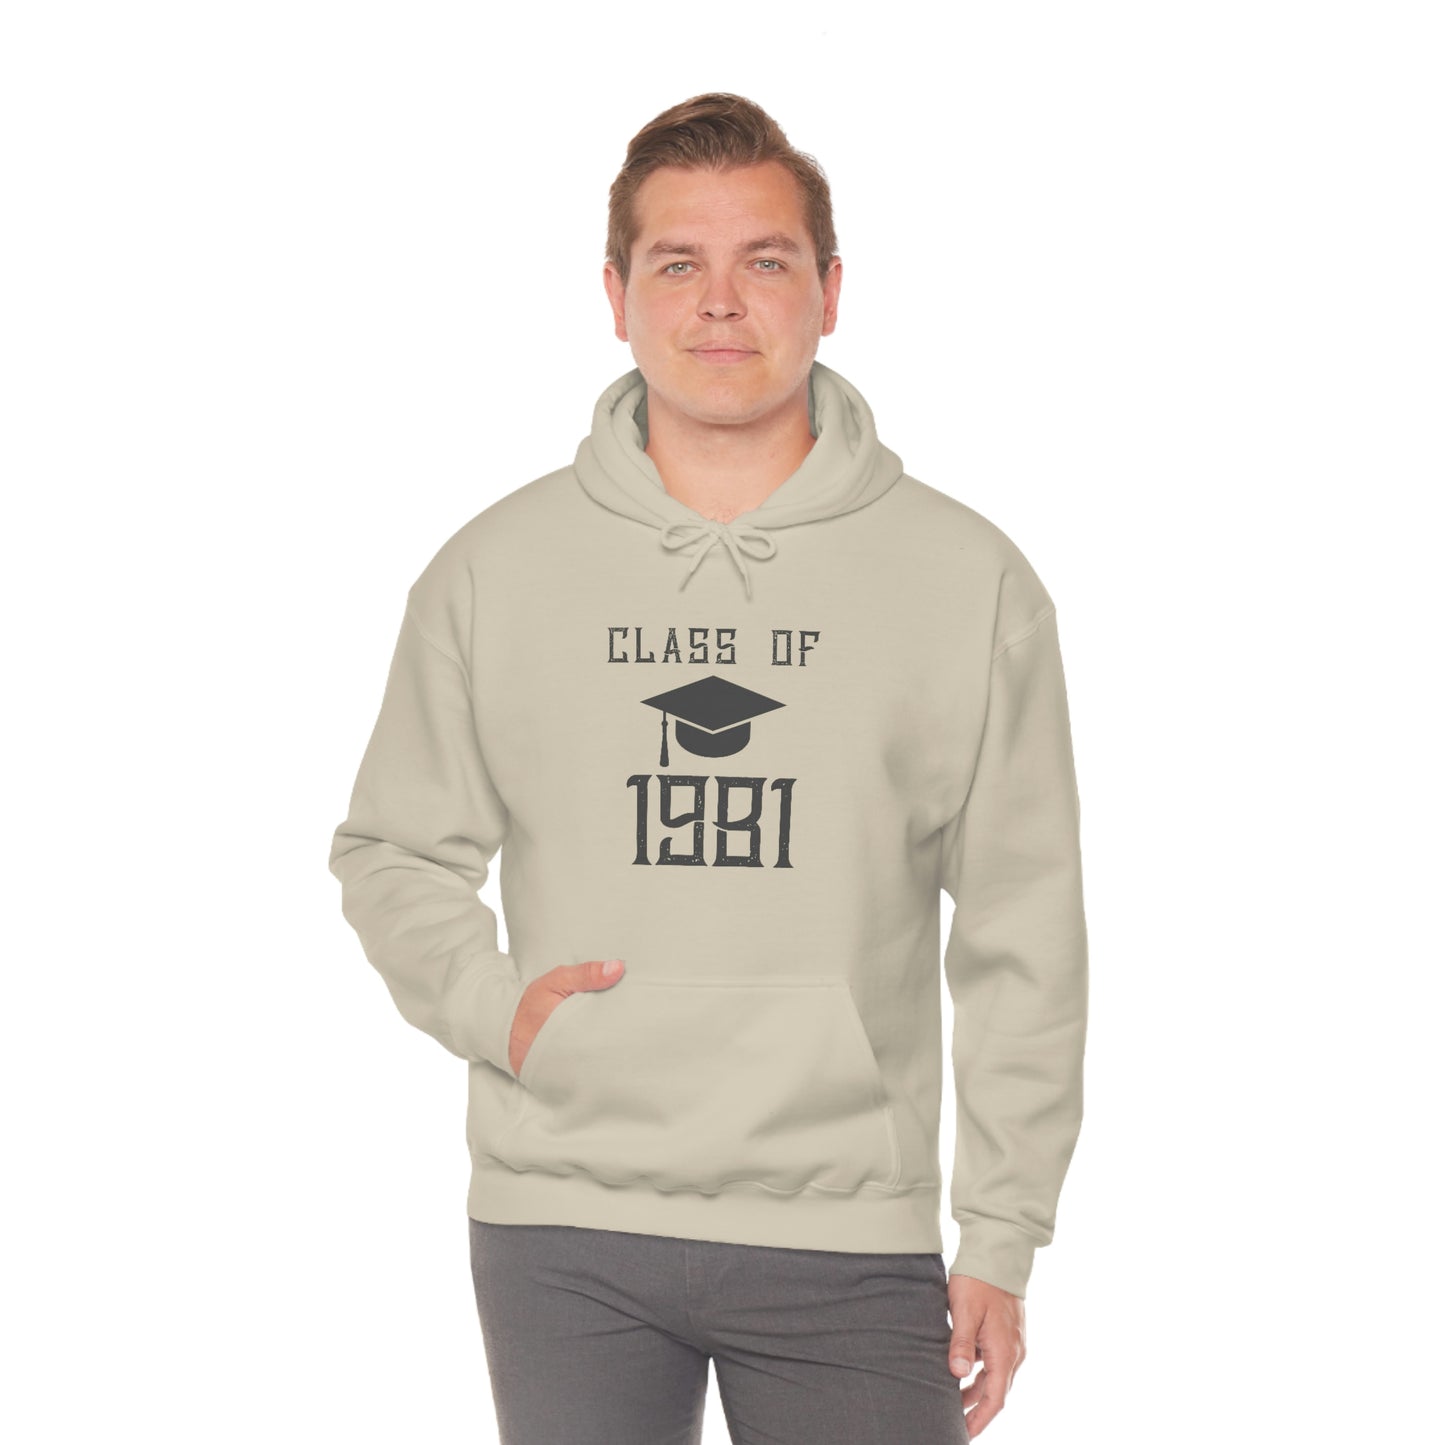 "Relaxed-fit '1981' hoodie, a meaningful gift for classmates."